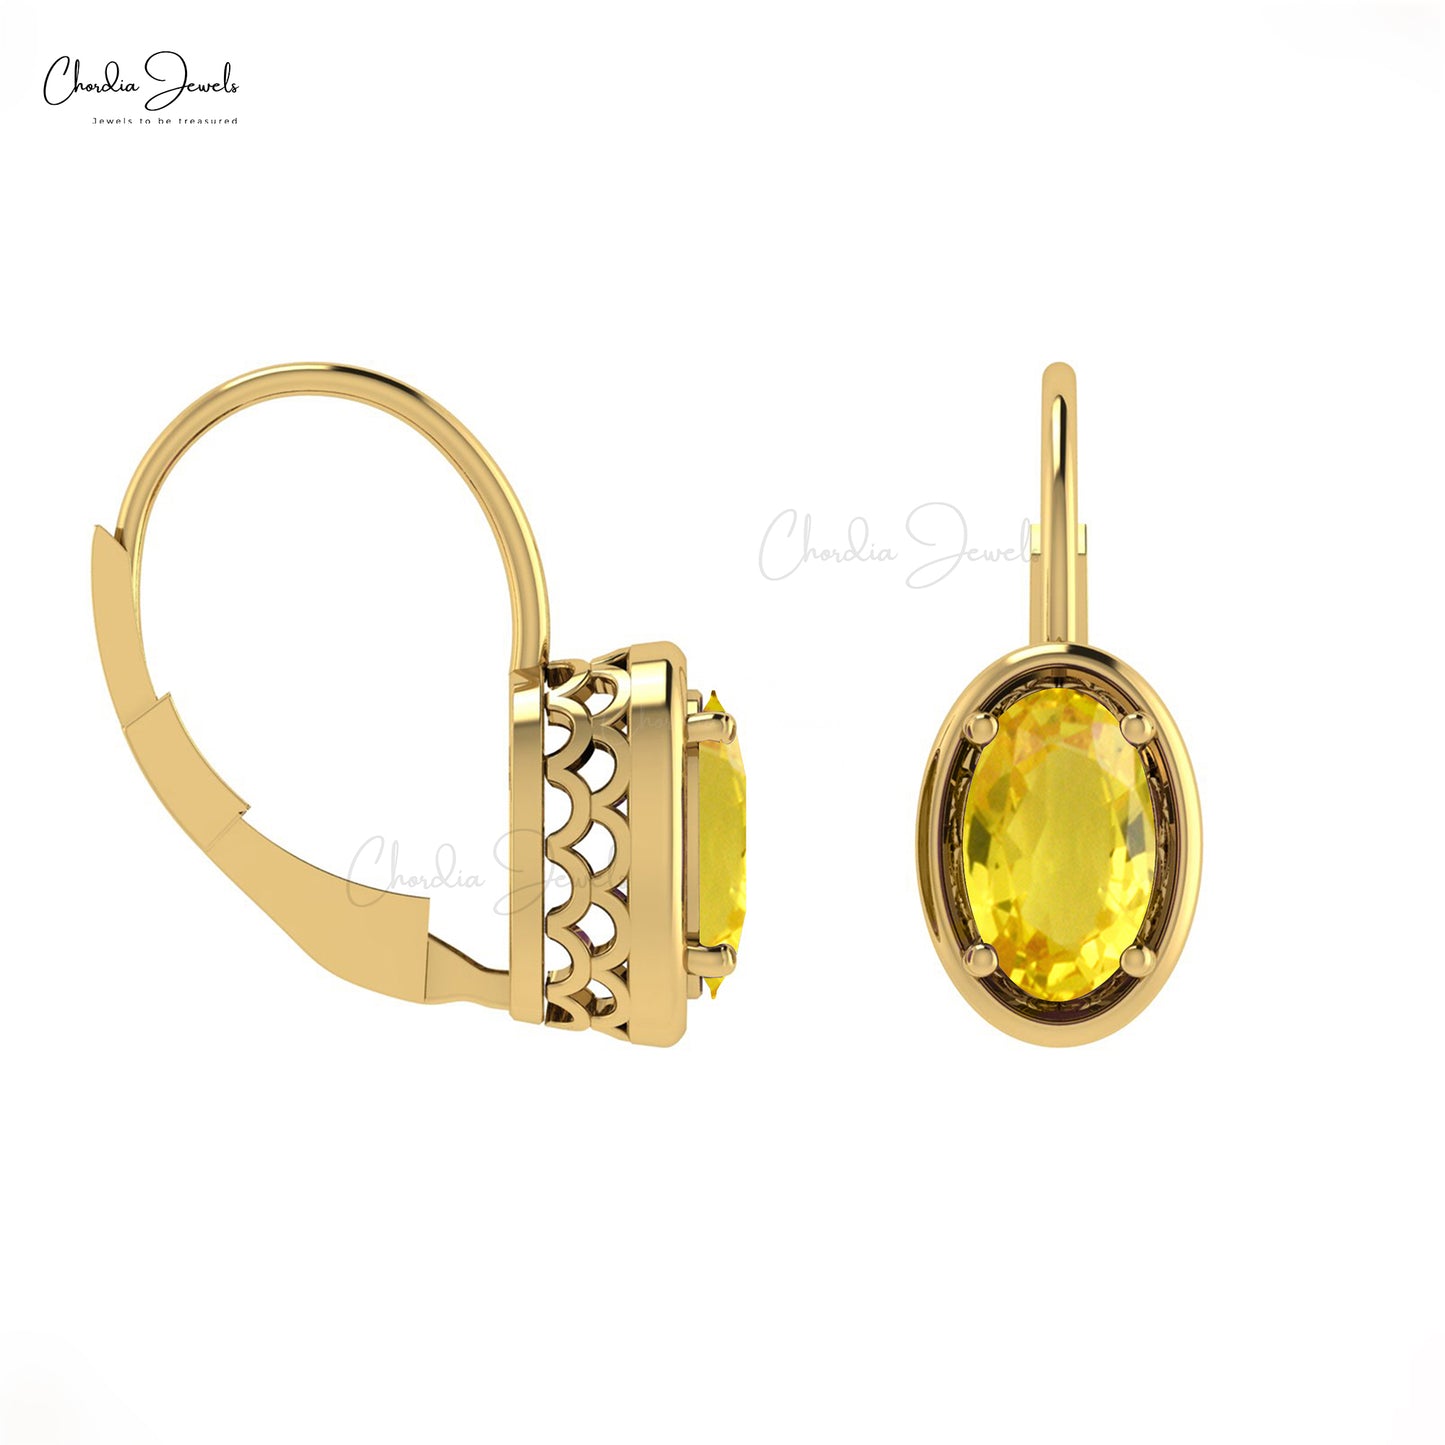 Genuine 1.4ct Yellow Sapphire Dangle Earrings 14k Solid Gold Leverback Earring For Her